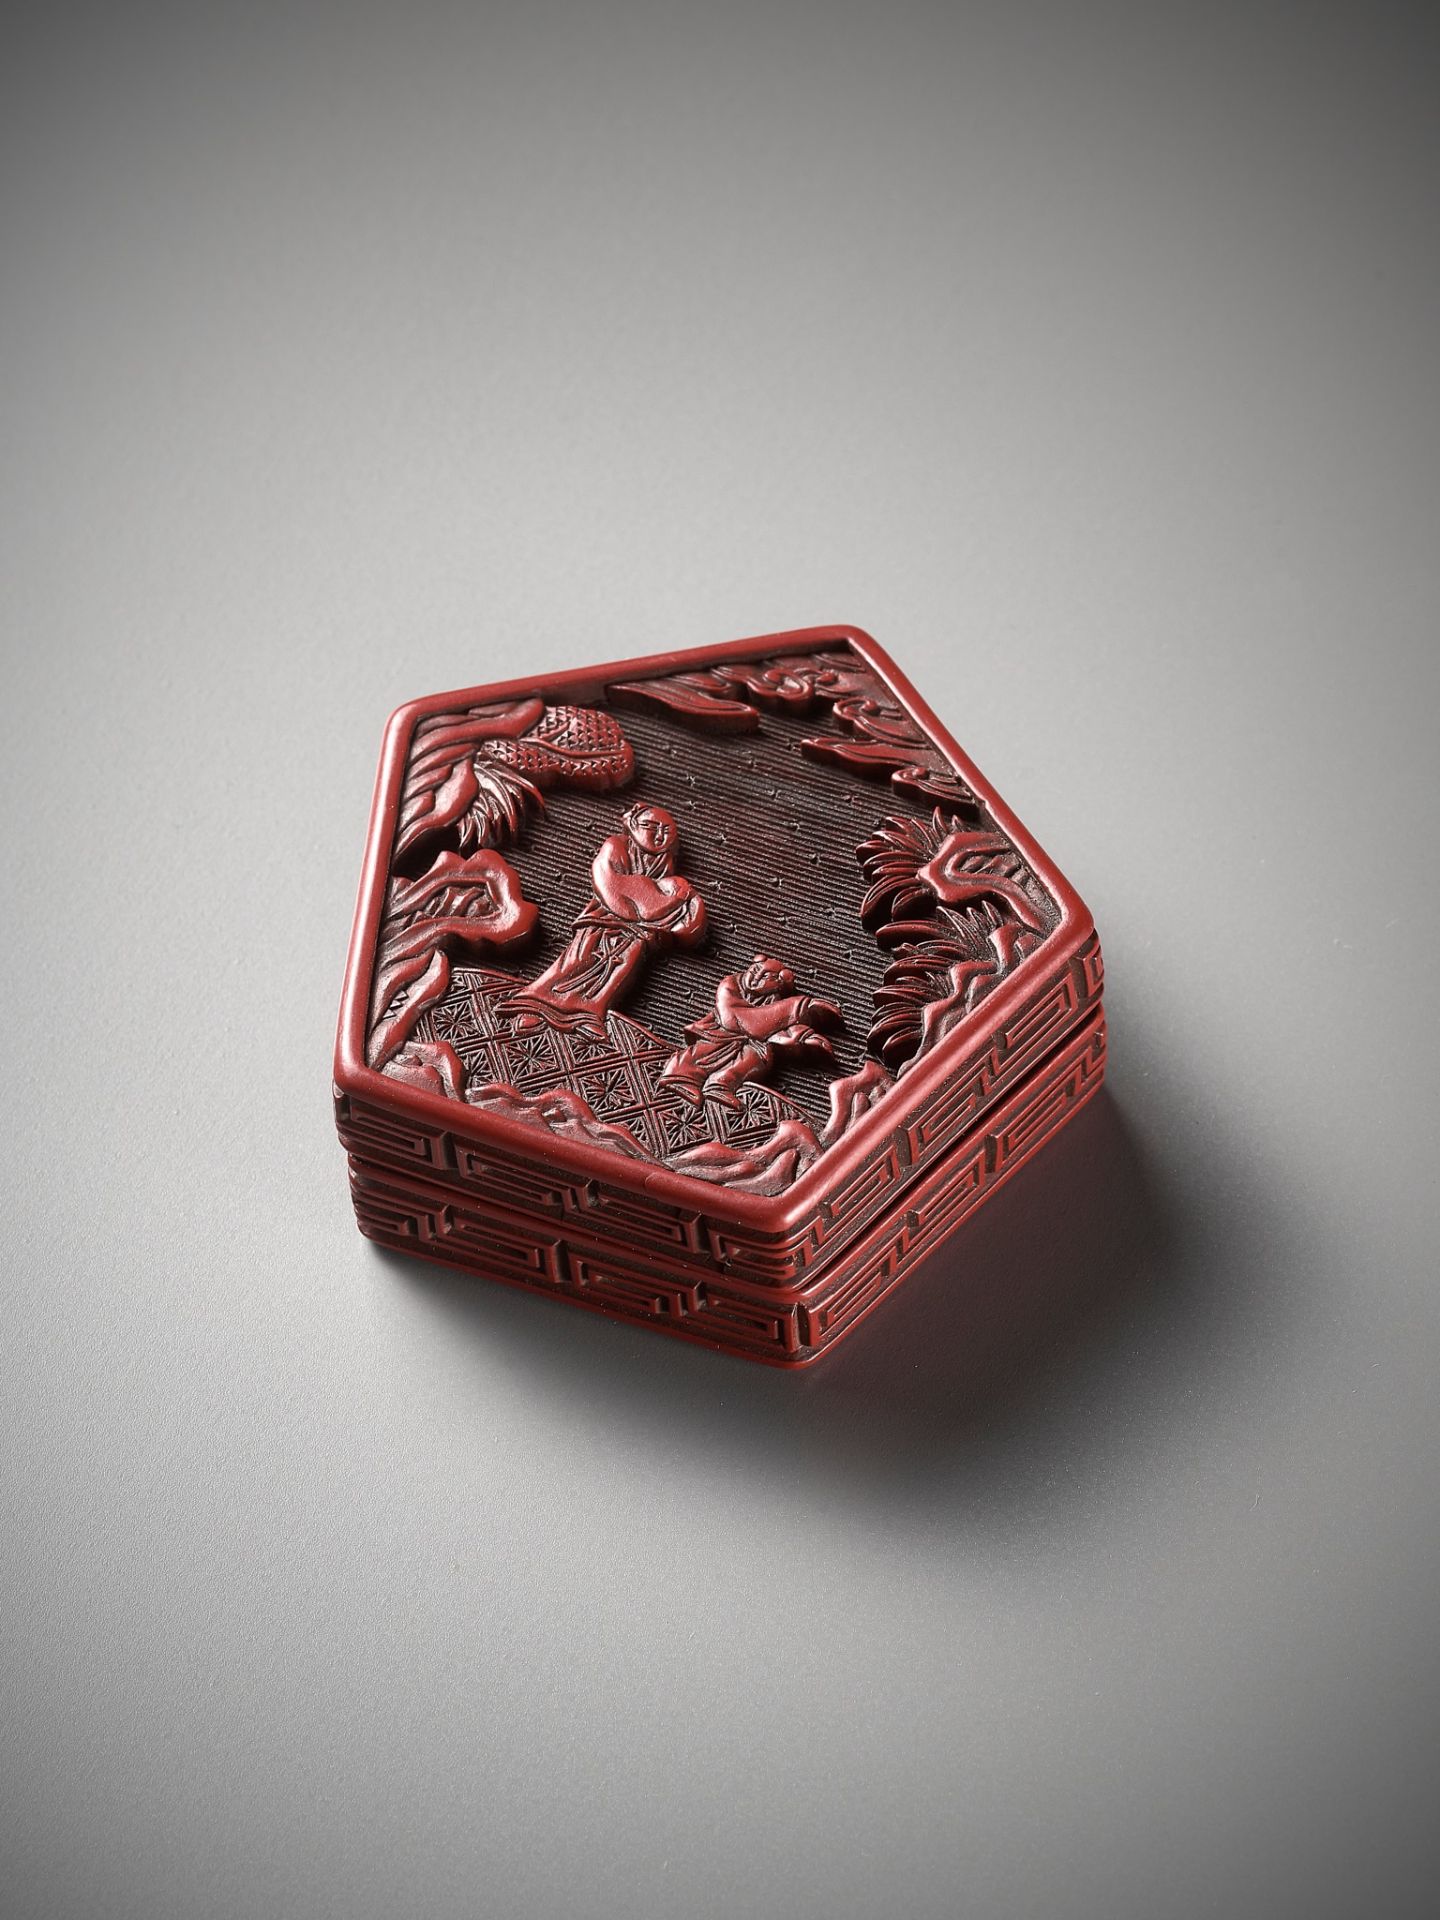 A SMALL CINNABAR LACQUER BOX AND COVER, YUAN TO MID-MING DYNASTY - Image 4 of 13